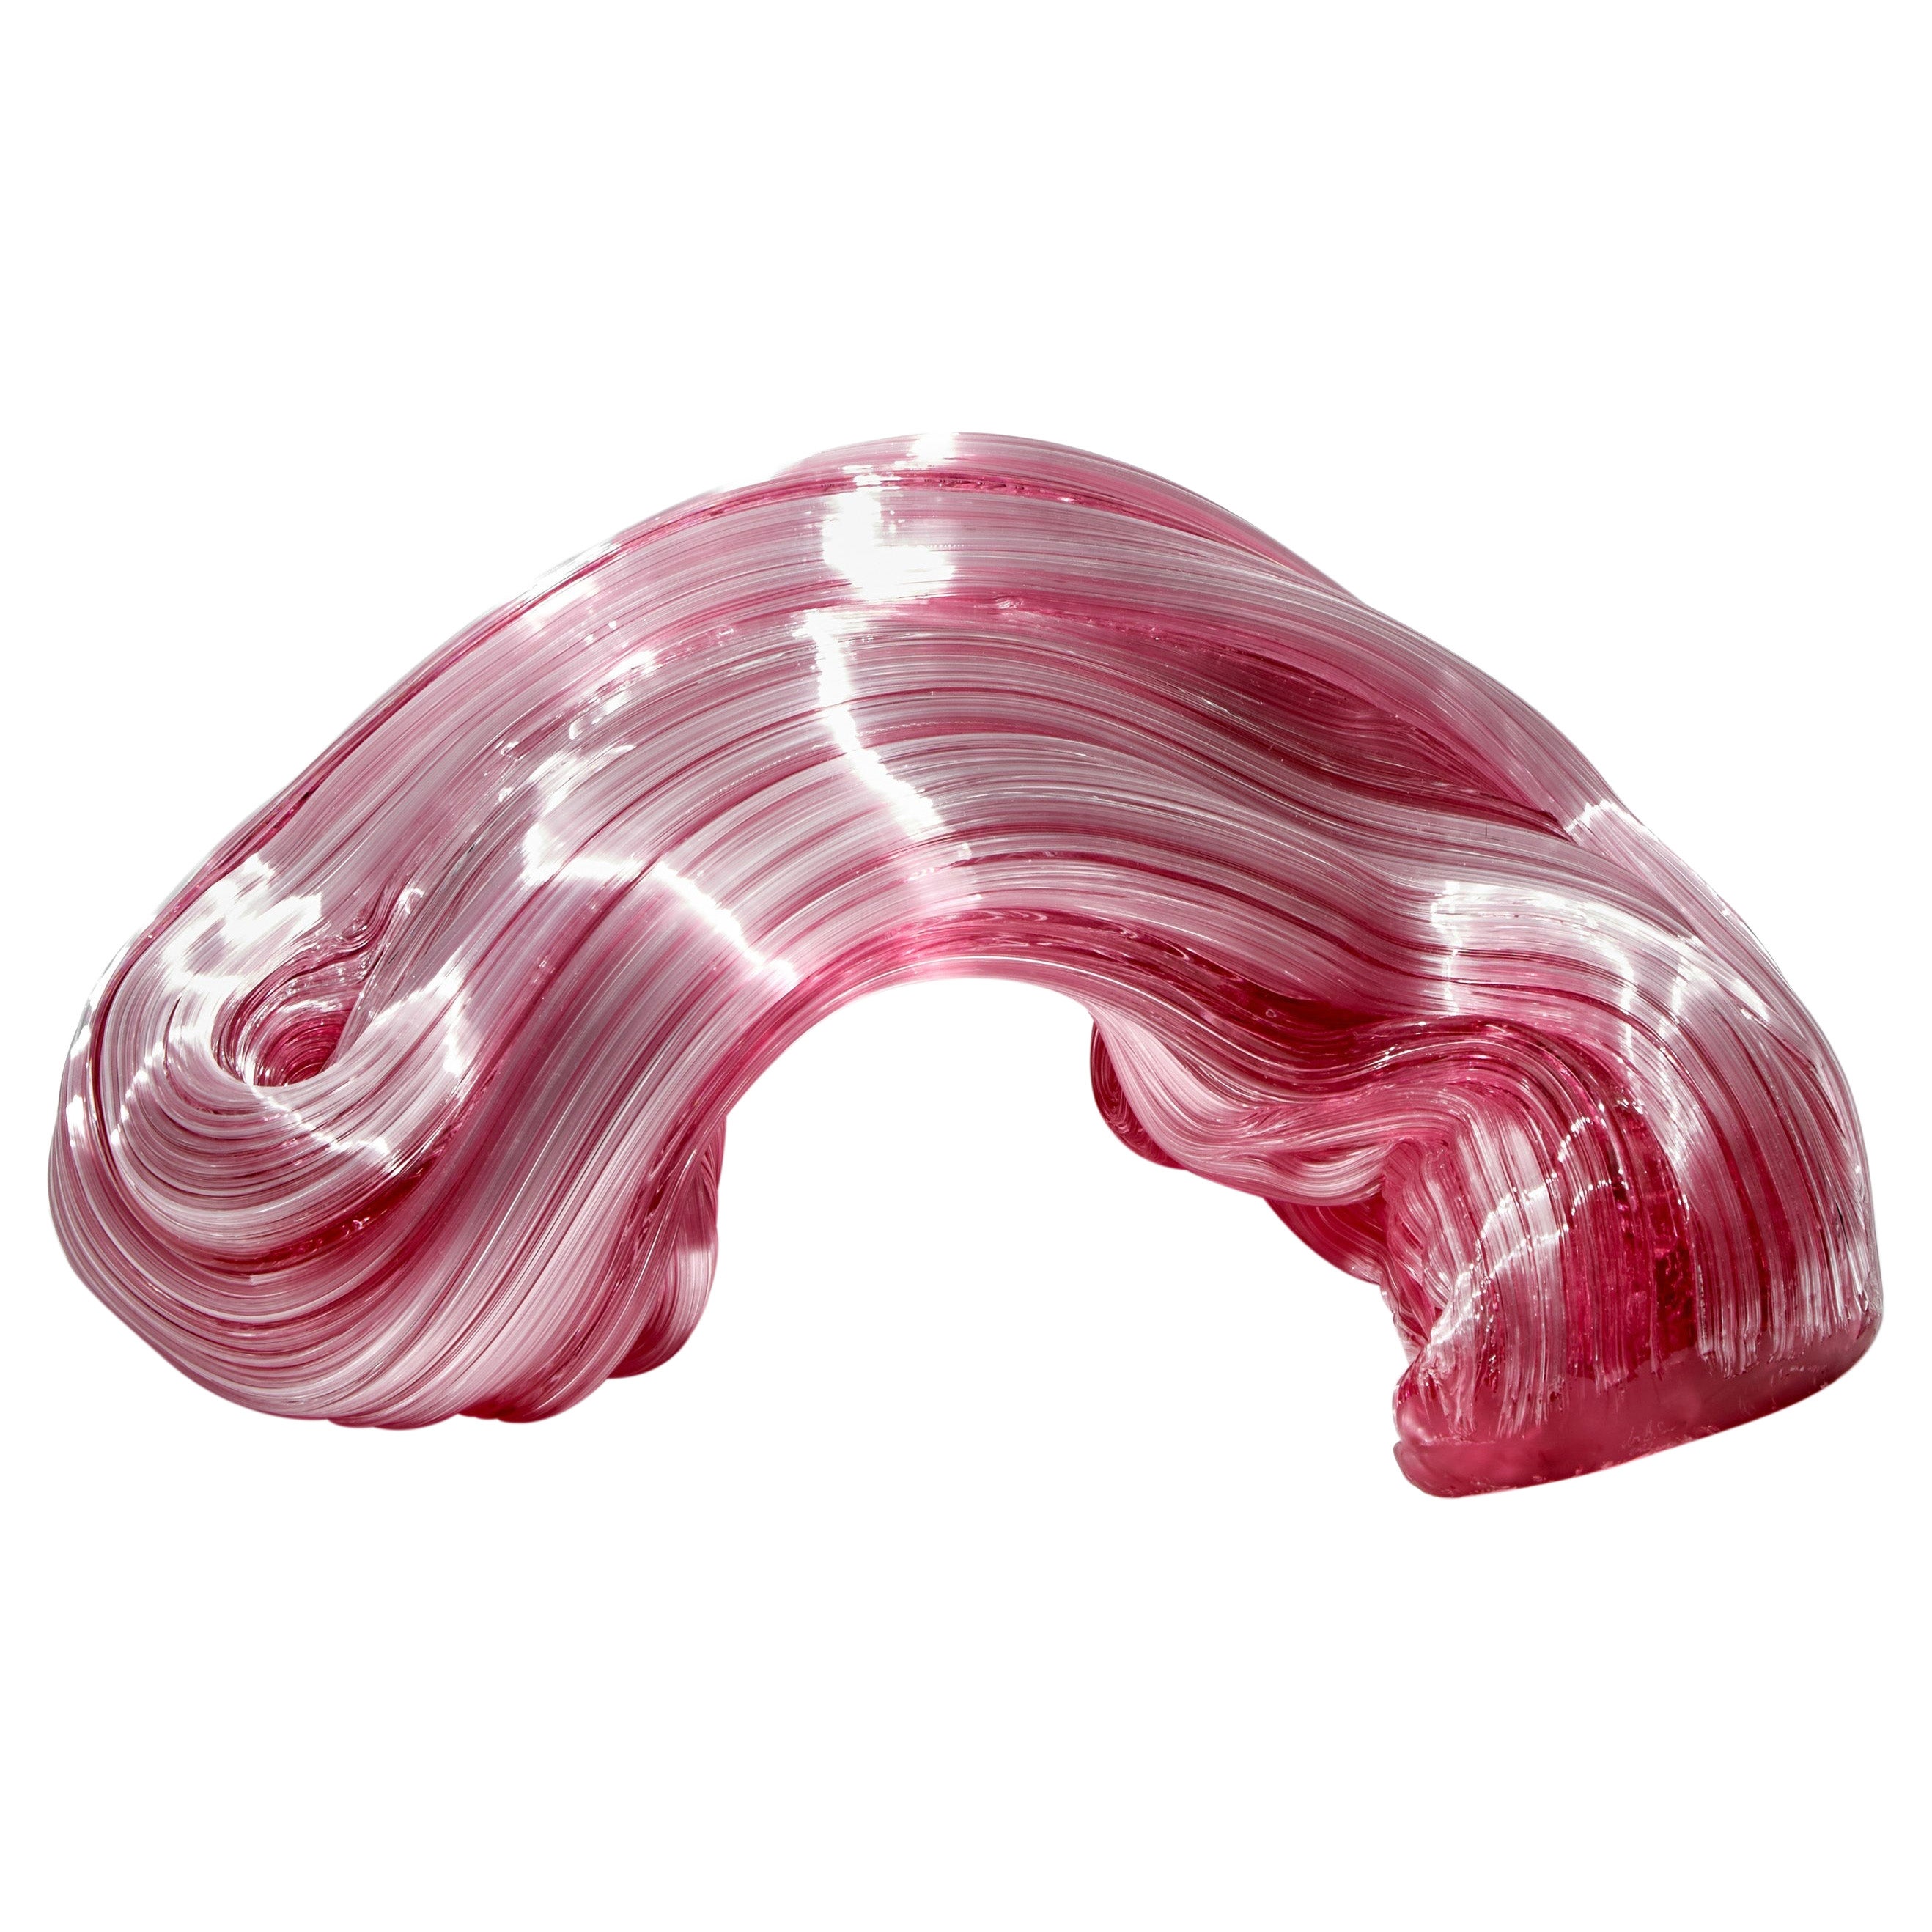 Soft Lines in Pink, a Unique Abstract Glass Sculpture by Maria Bang Espersen